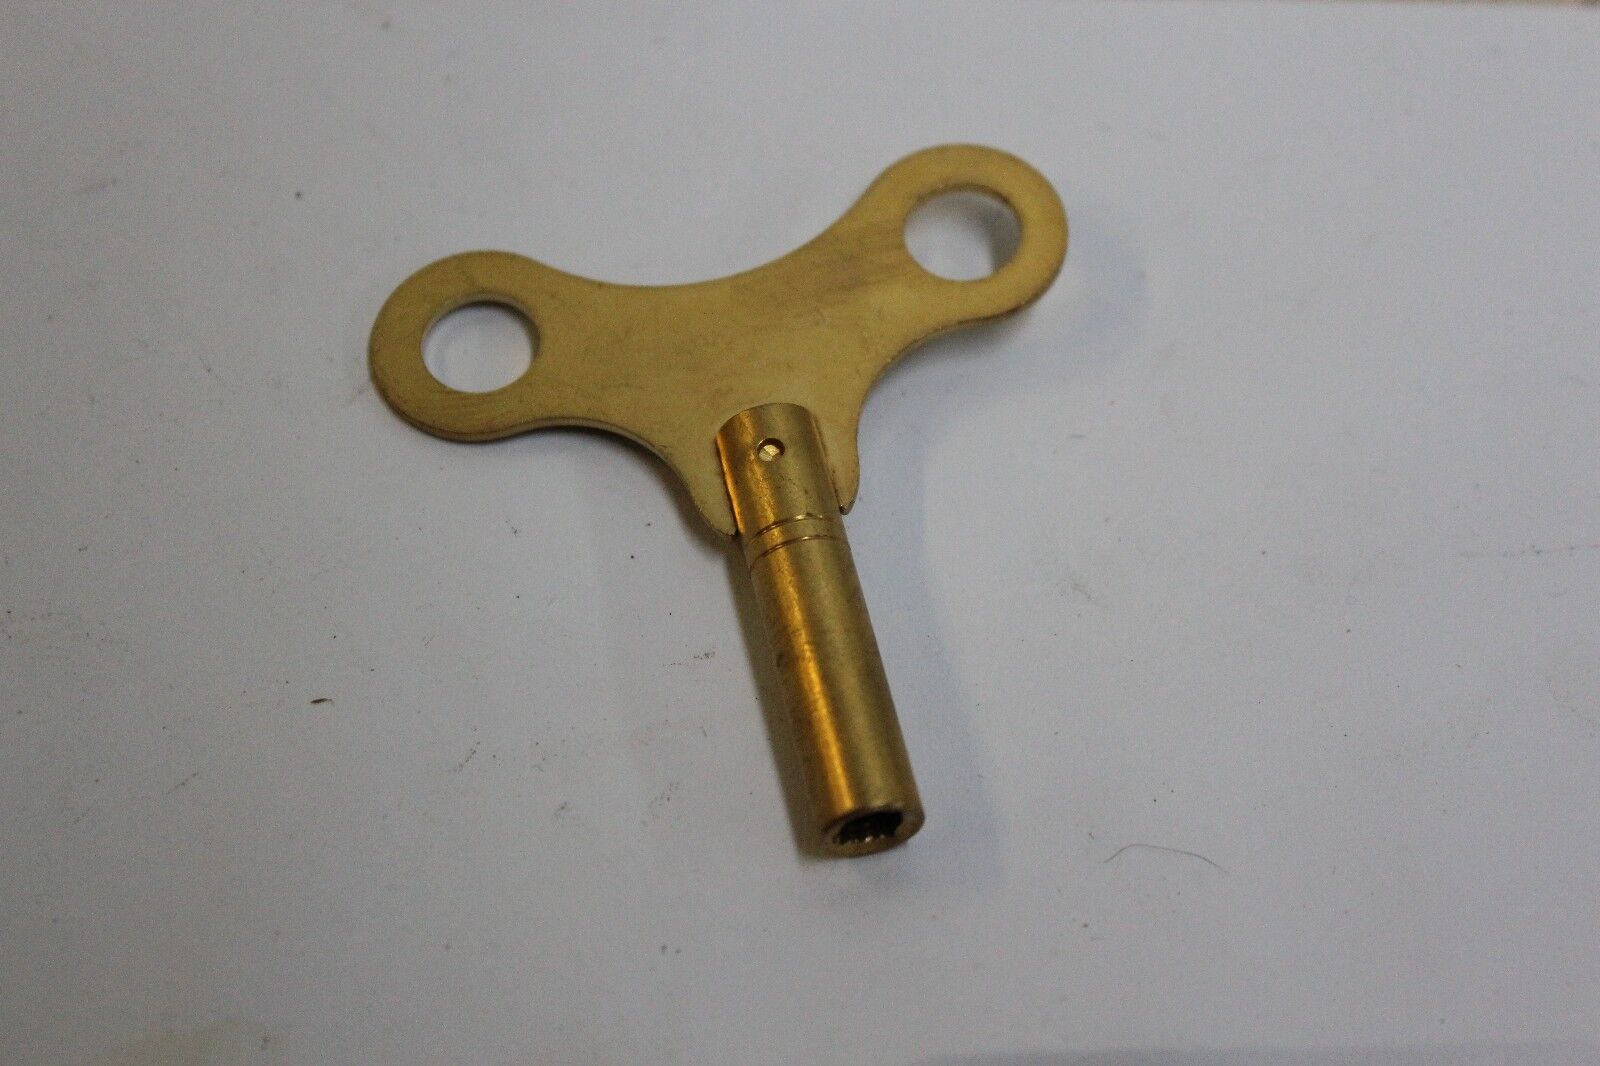 New Brass Replacement Clock Key Size 7 / 4.0 mm For Key Wind Clocks